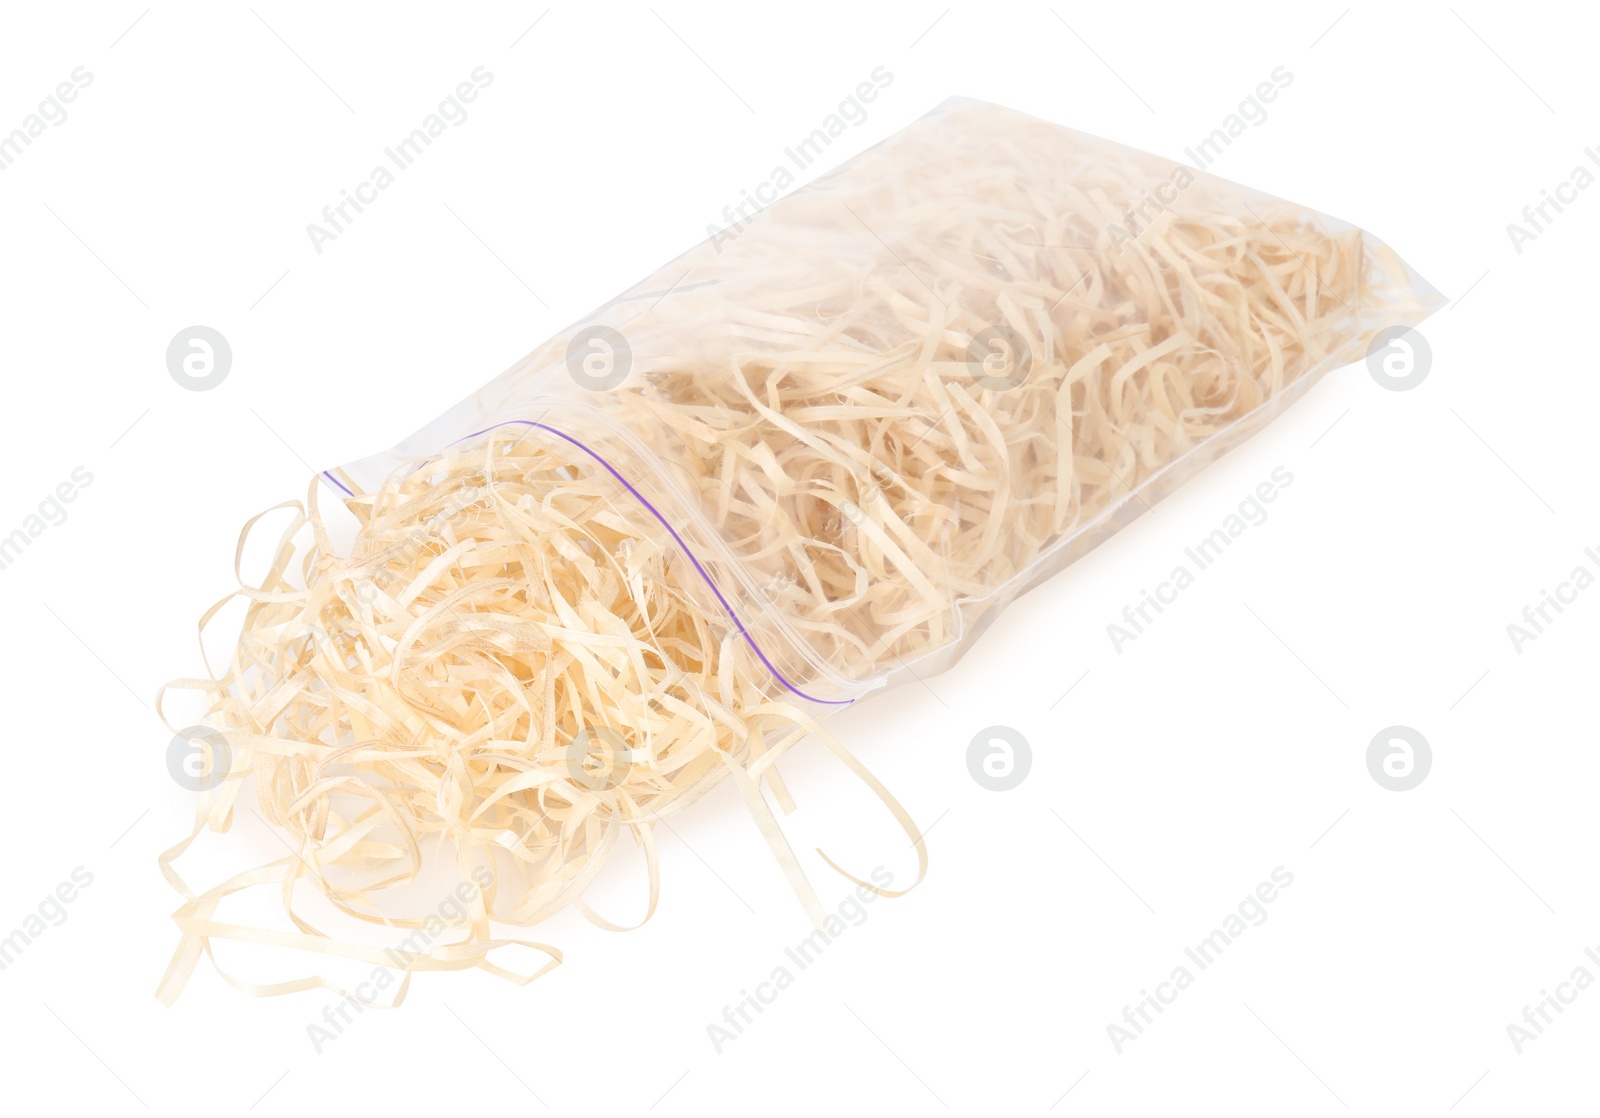 Photo of Wood shavings in zip bag isolated on white